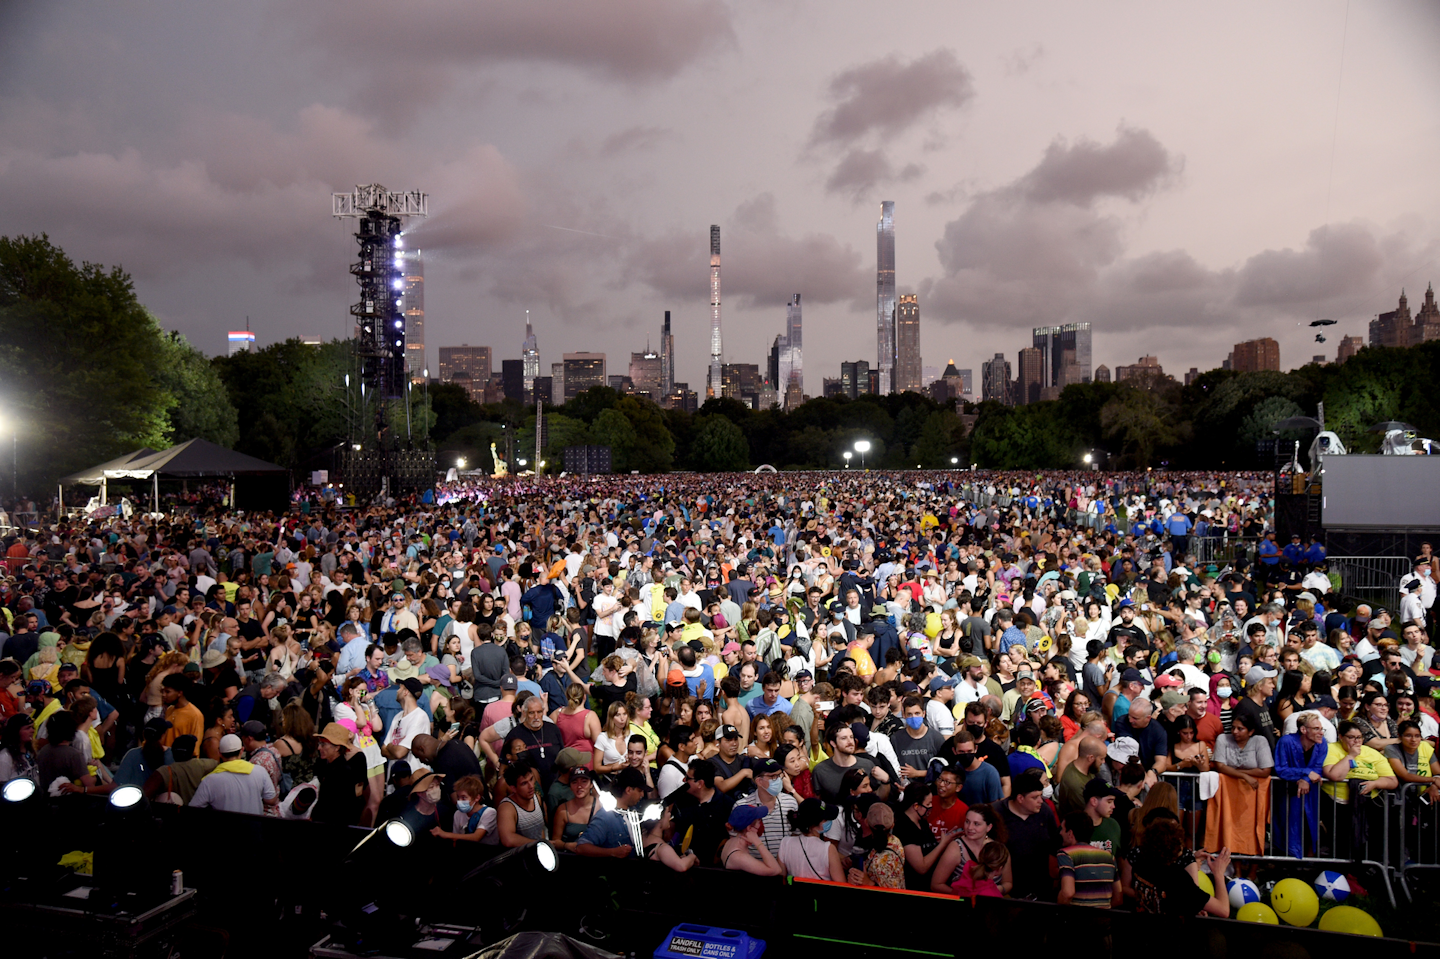 Hurricane Henri loomed over the crowd at the 'We Love NYC: The Homecoming Concert.”